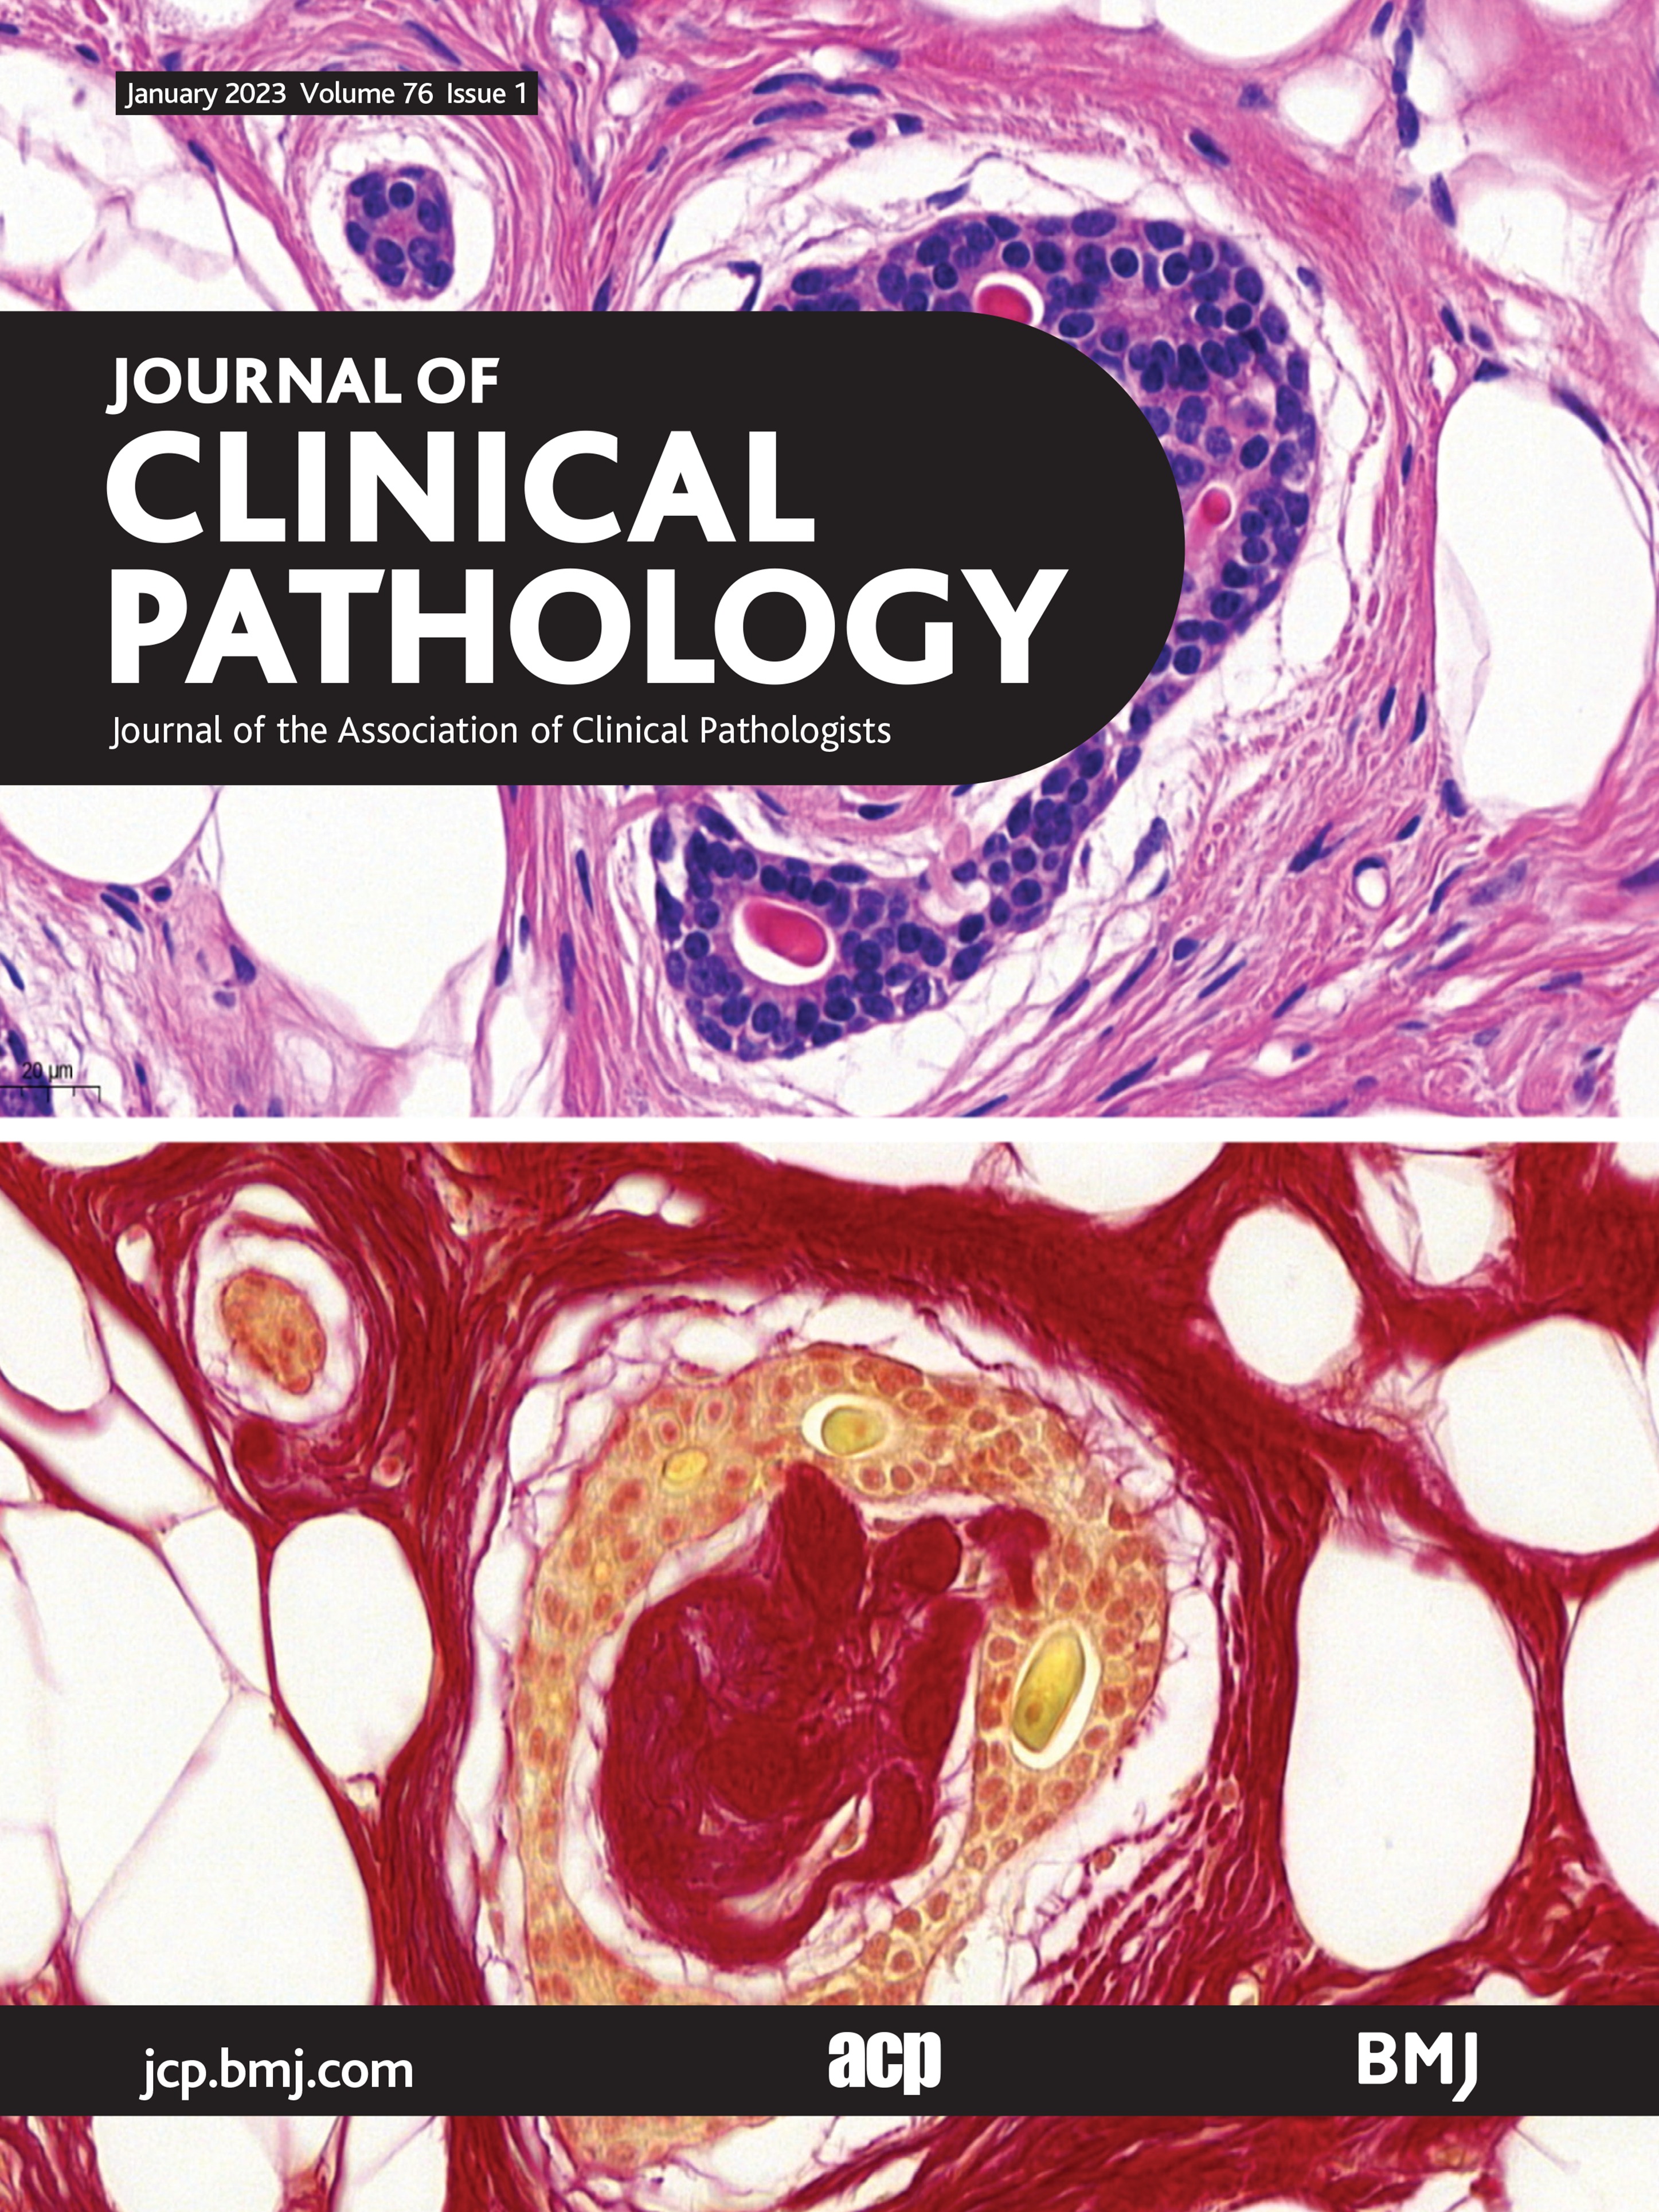 High-risk human papillomavirus (HPV) detection in formalin-fixed paraffin-embedded cervical tissues: performances of Aptima HPV assay and Beckton Dickinson (BD) Onclarity assay